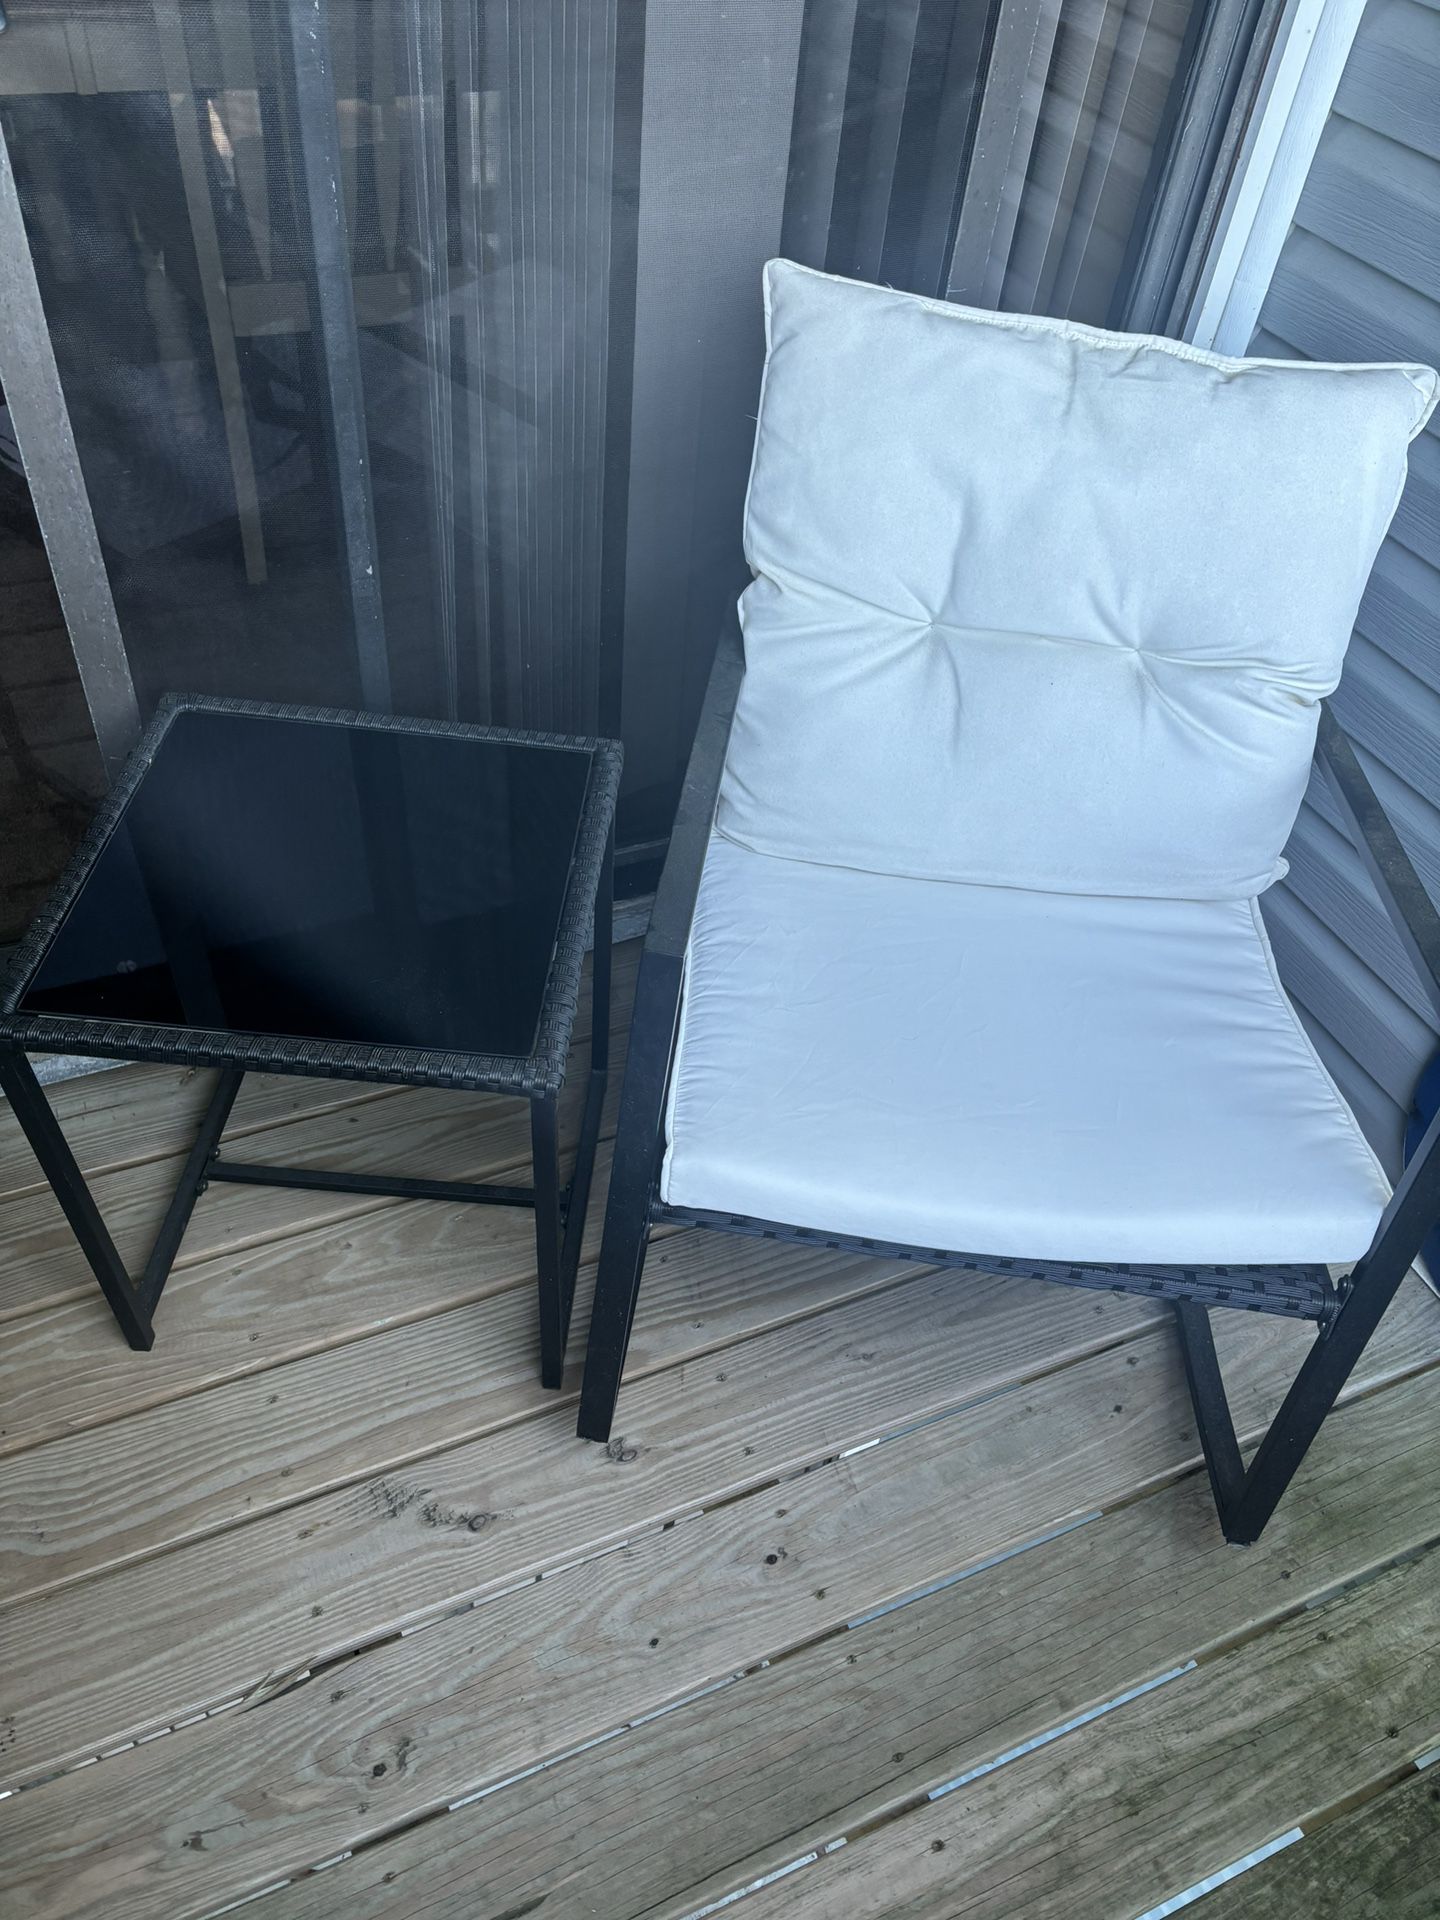 2 Outdoor Patio Chairs / rockers & Table Set